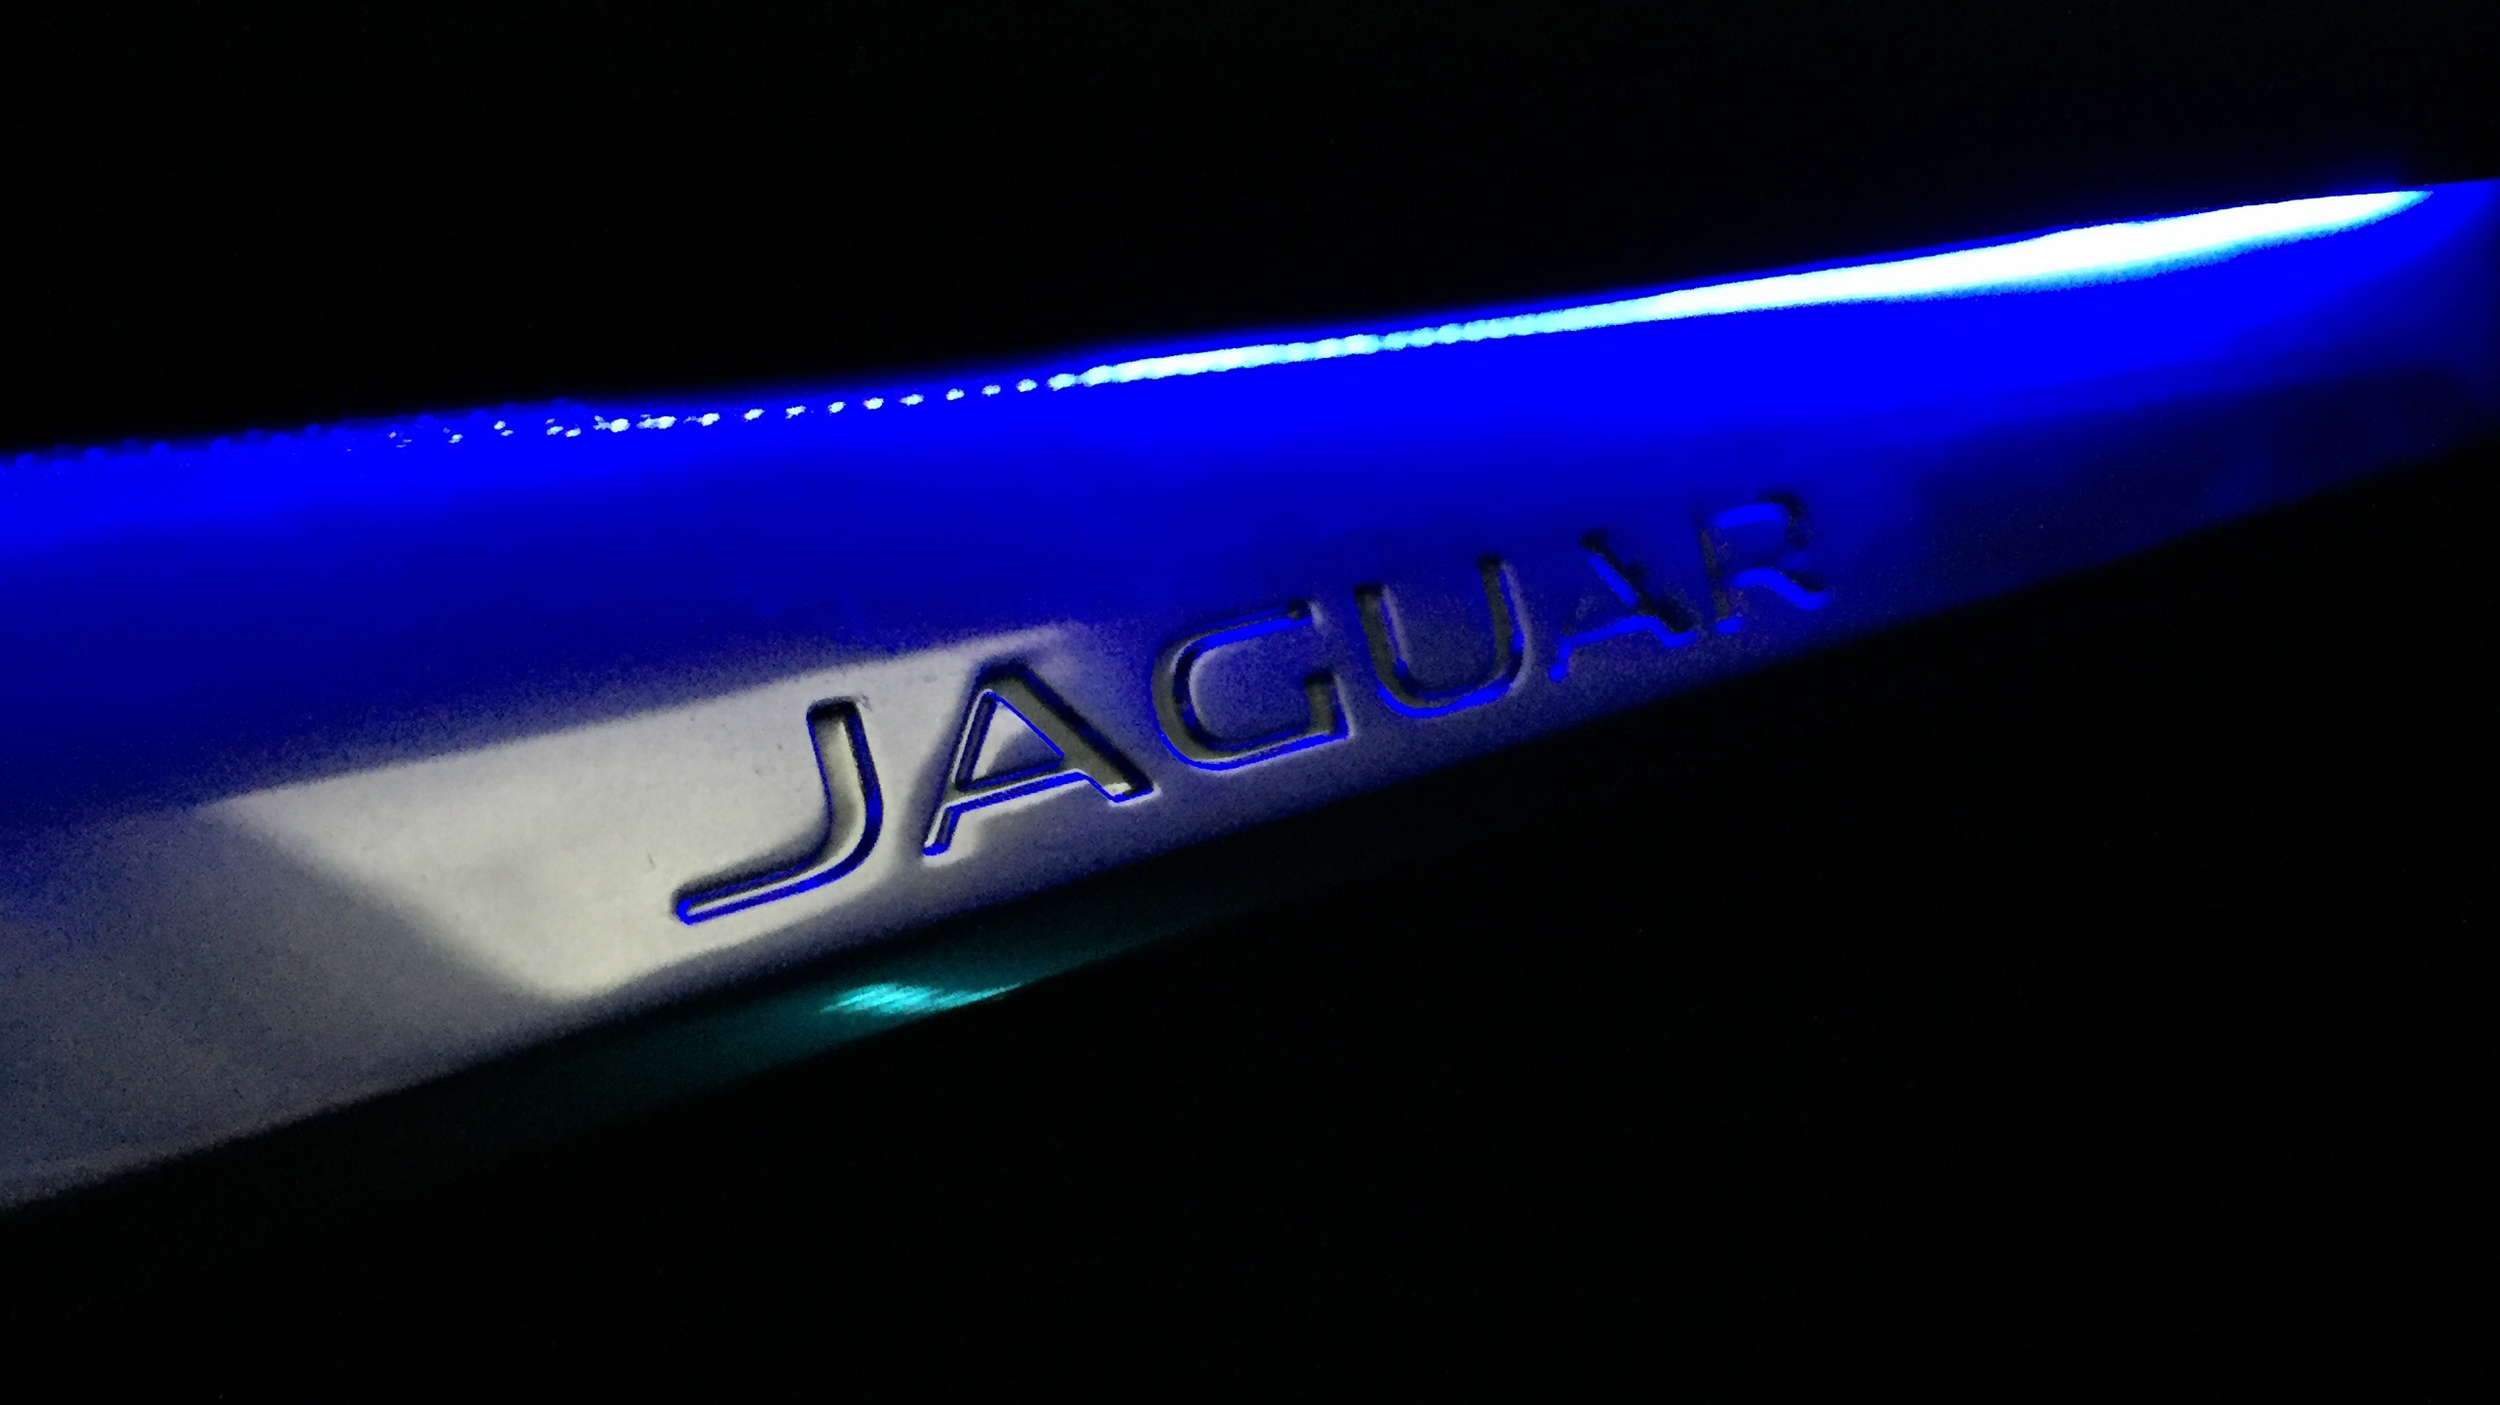 Our 2018 Jaguar F-Pace has cool customizable ambient lighting that ...